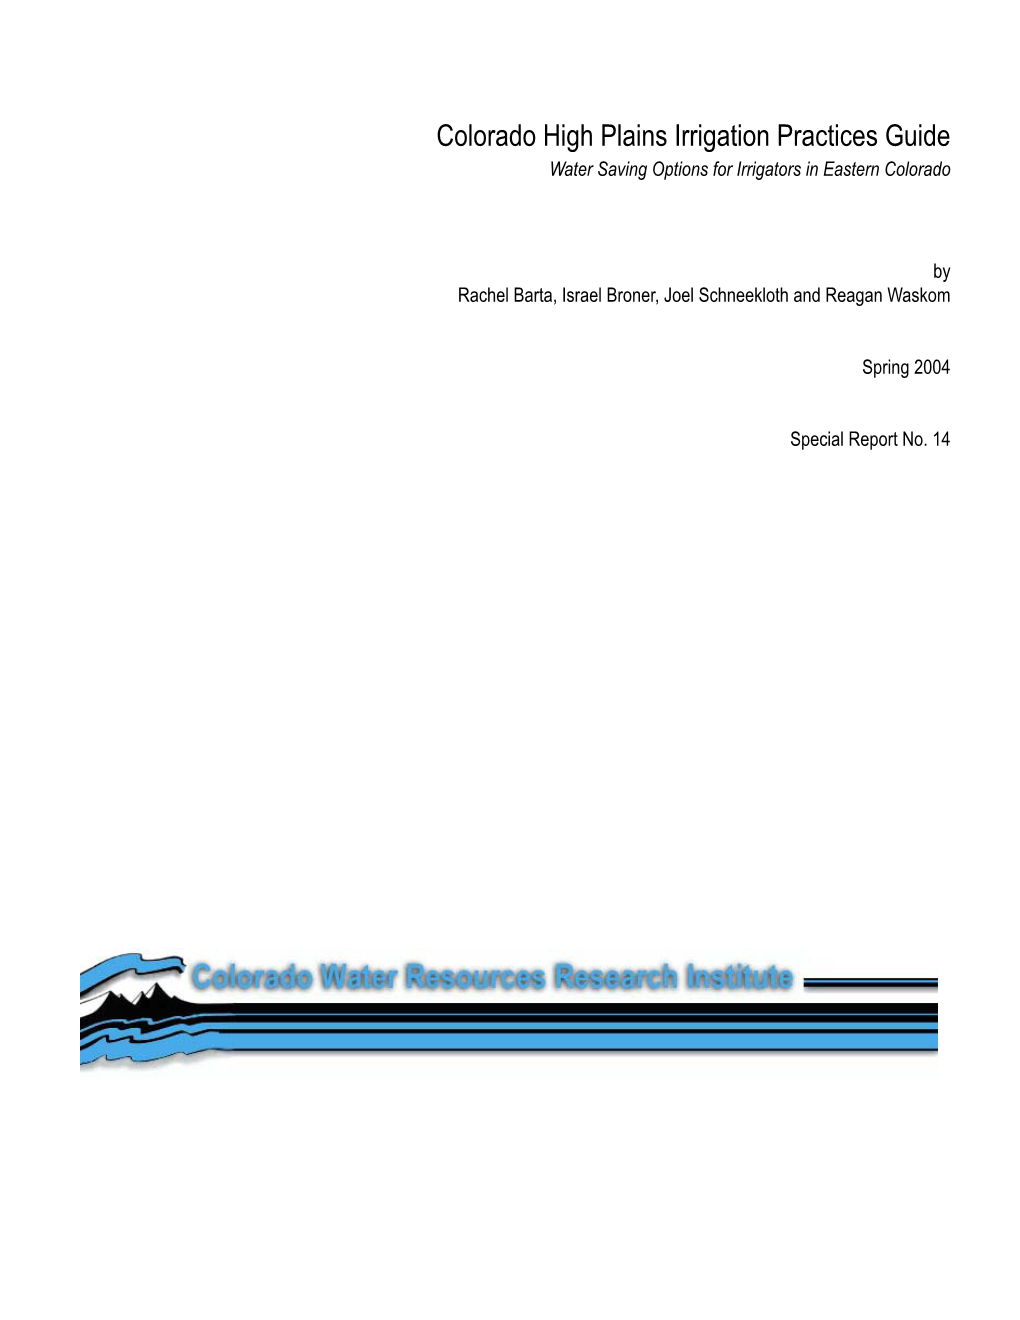 Colorado High Plains Irrigation Practices Guide Water Saving Options for Irrigators in Eastern Colorado